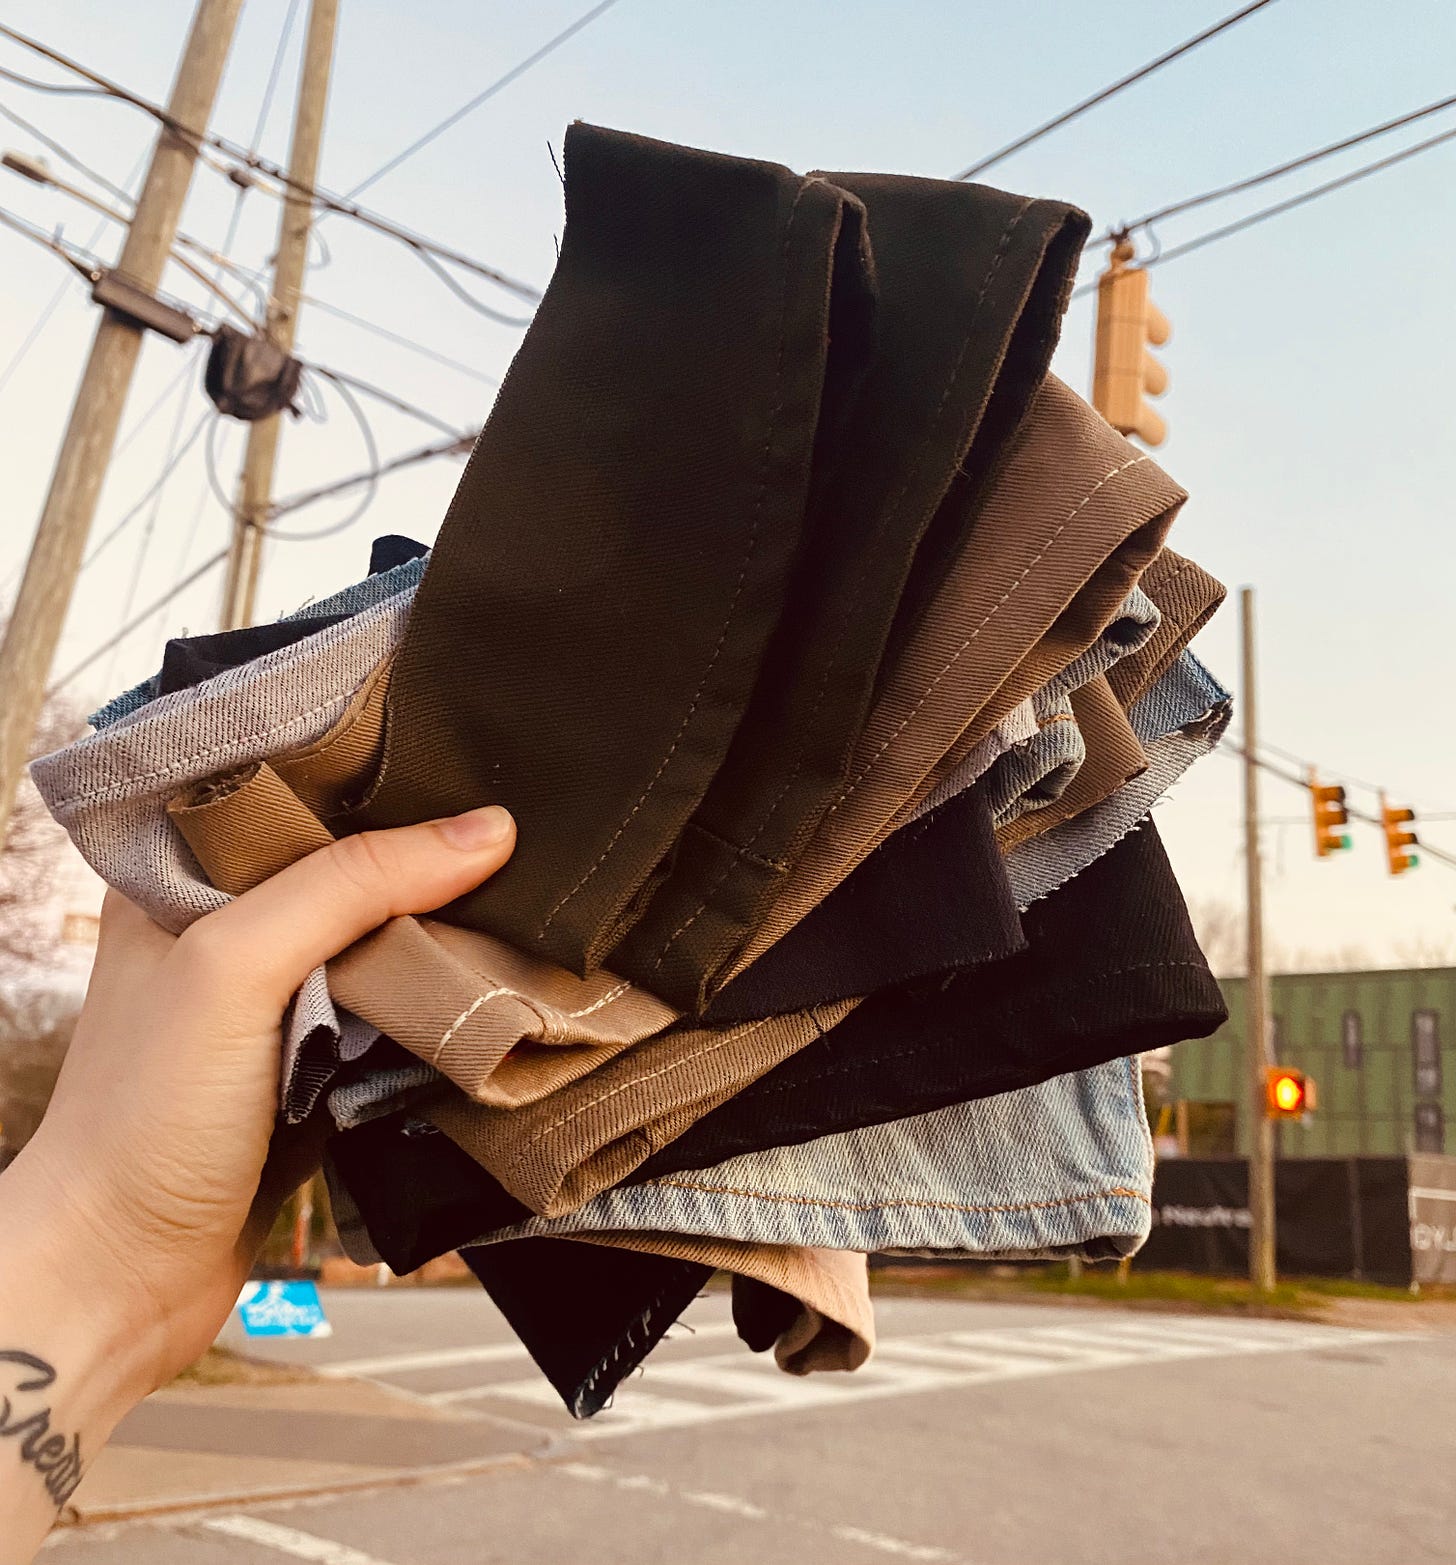 Me holding the fabric scraps in front of an intersection in Raleigh.